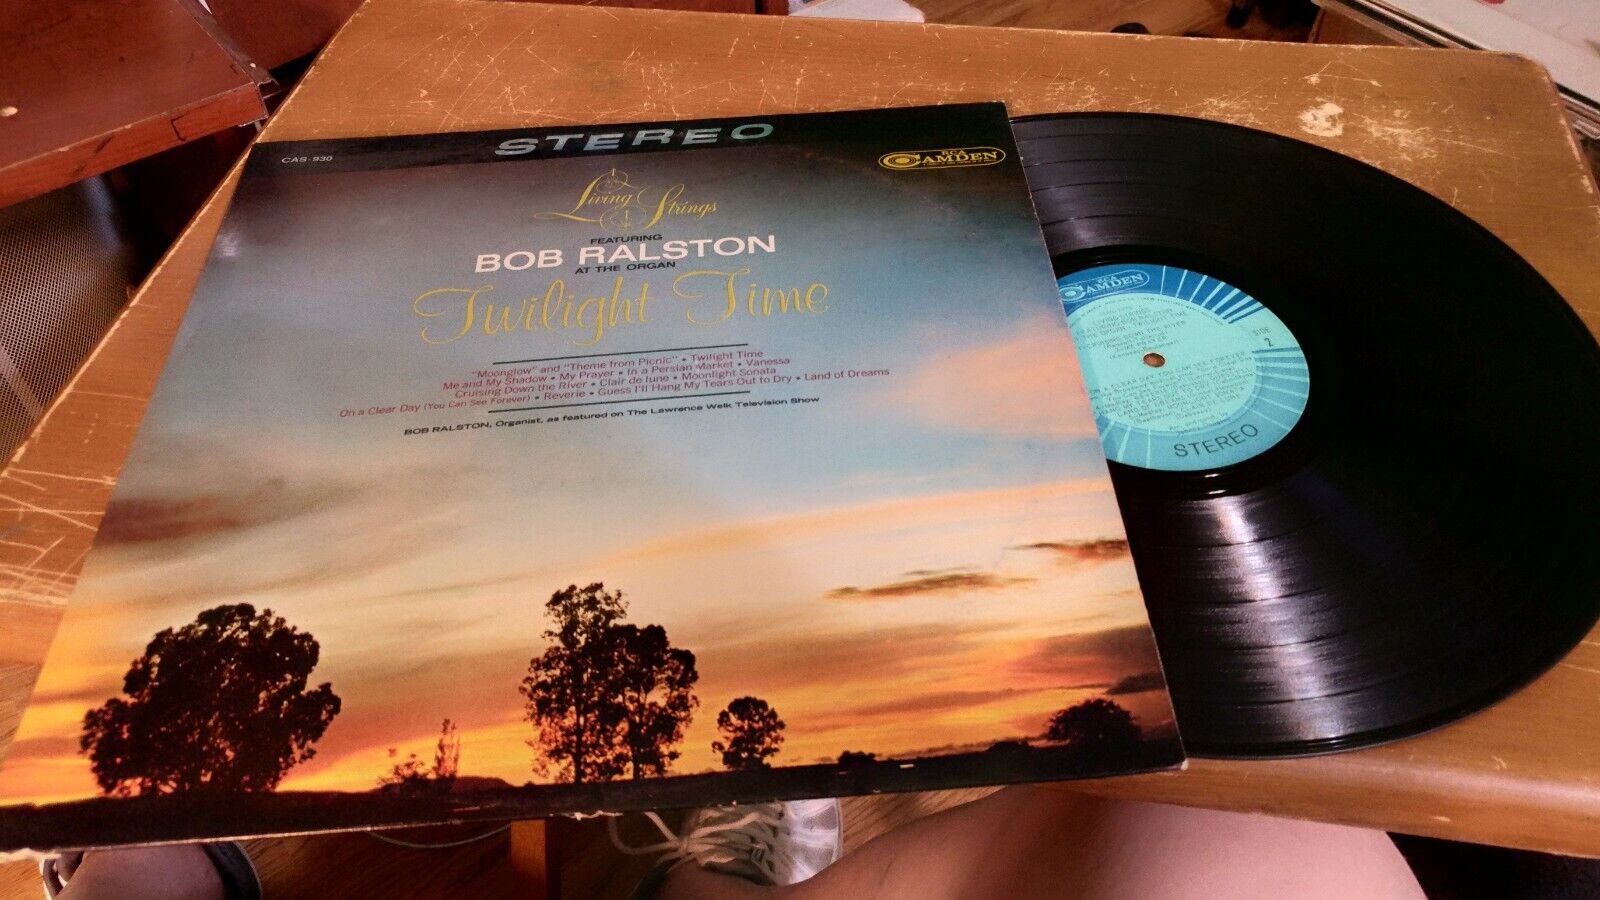 LIVING STRINGS FEATURING BOB RALSTON TWILIGHT TIME STEREO RECORD ALBUM